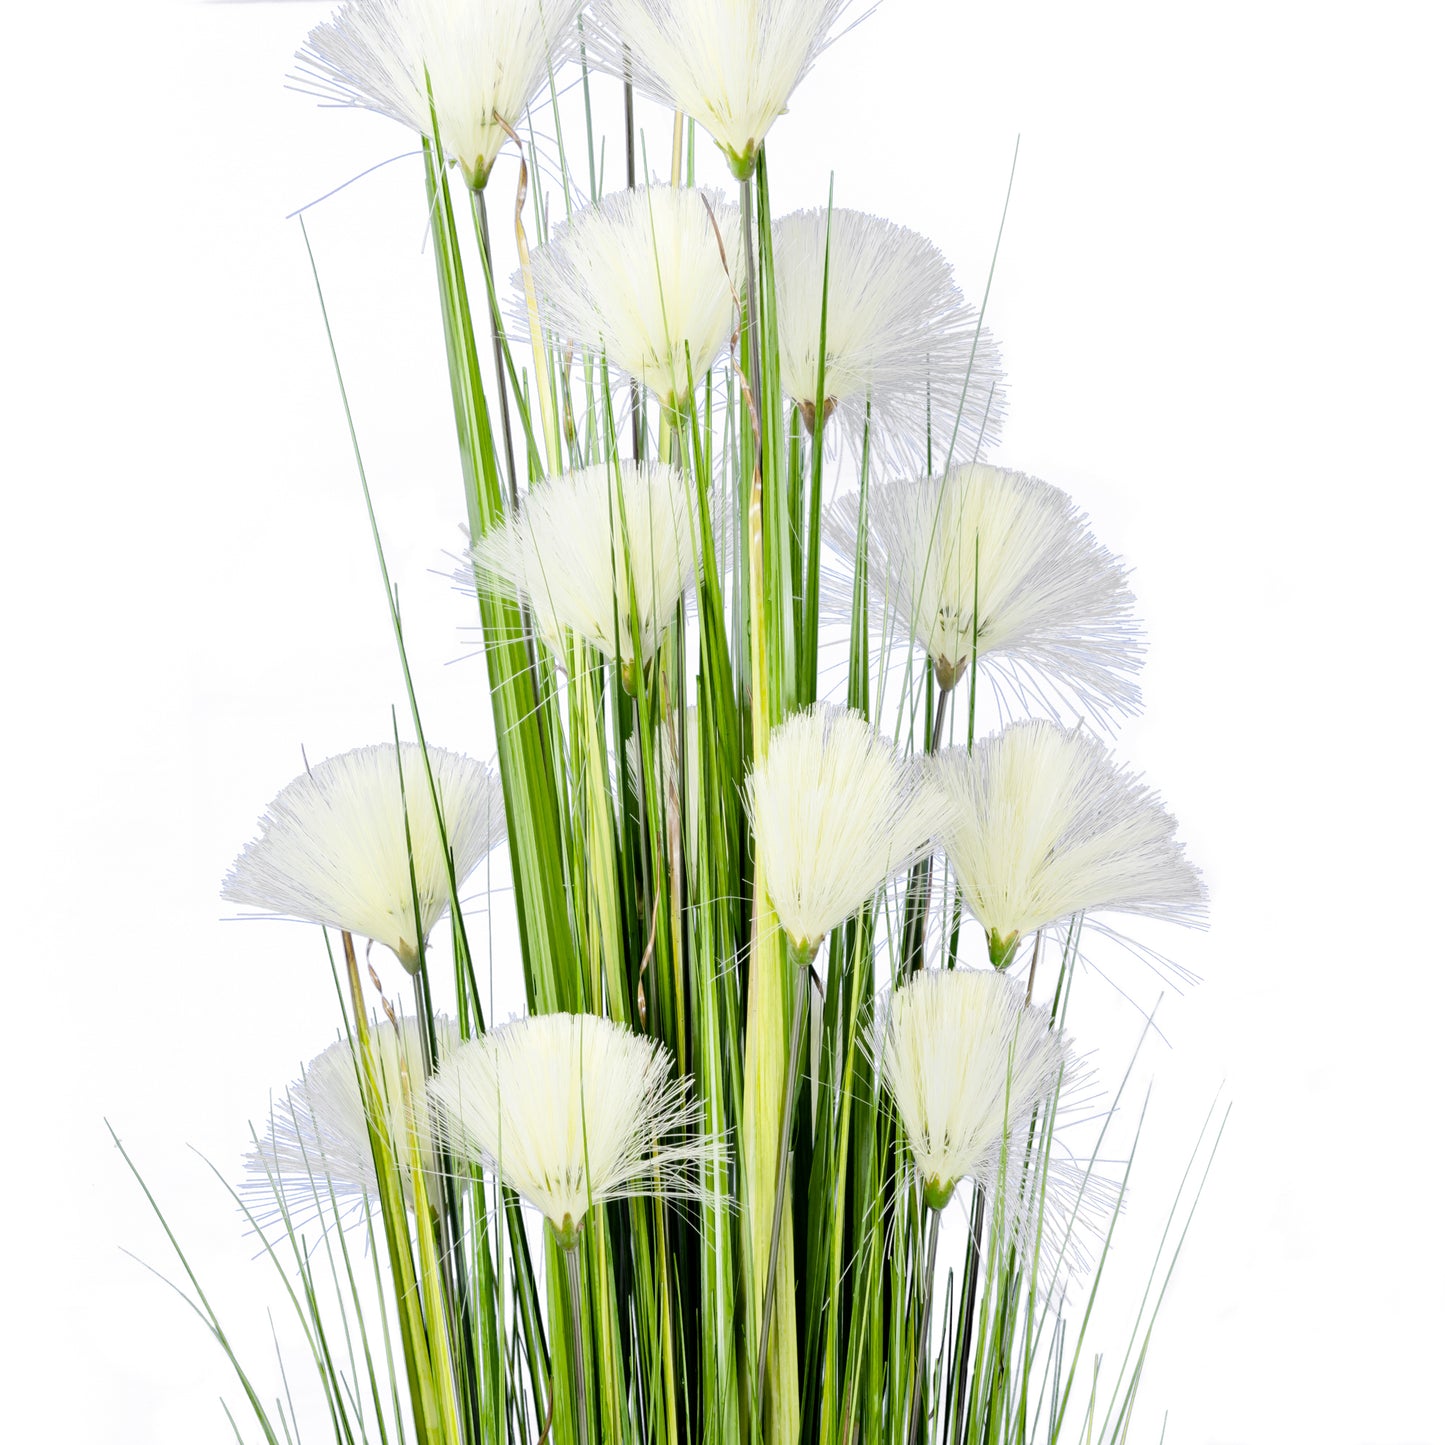 6 Feet High Artificial Reed Grass with Decorative Ivory Flowers